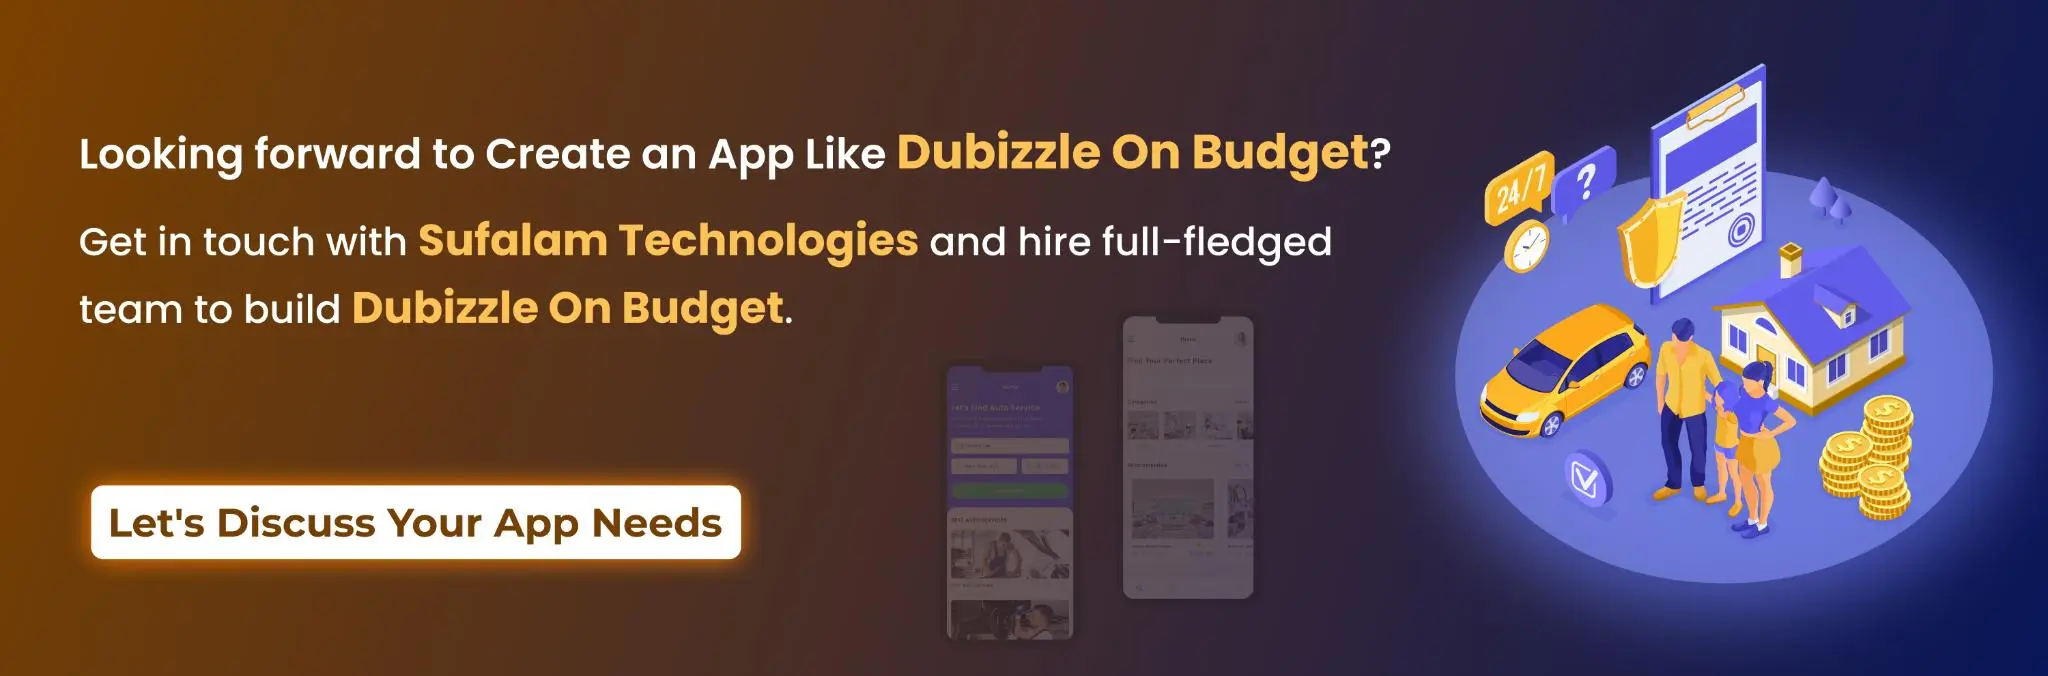 looking forward to create an app like dubizzle